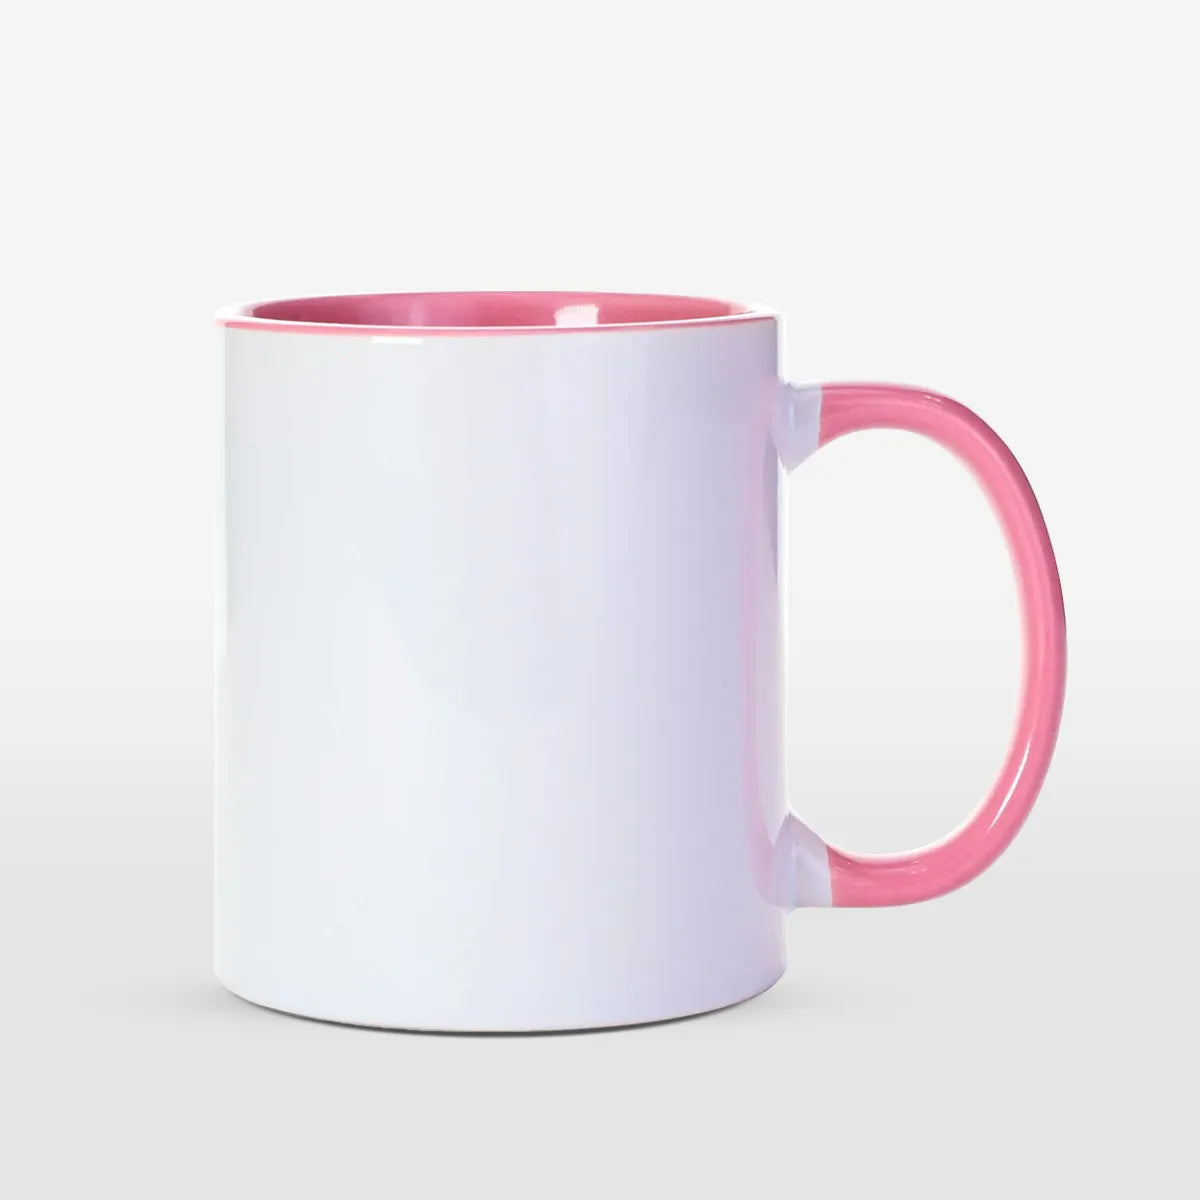 MR.R 11oz Sublimation Blank Coffee Mugs,Cup Blank White Mug Cup with Pink  Color Mug Inner and Handle,Set of 6